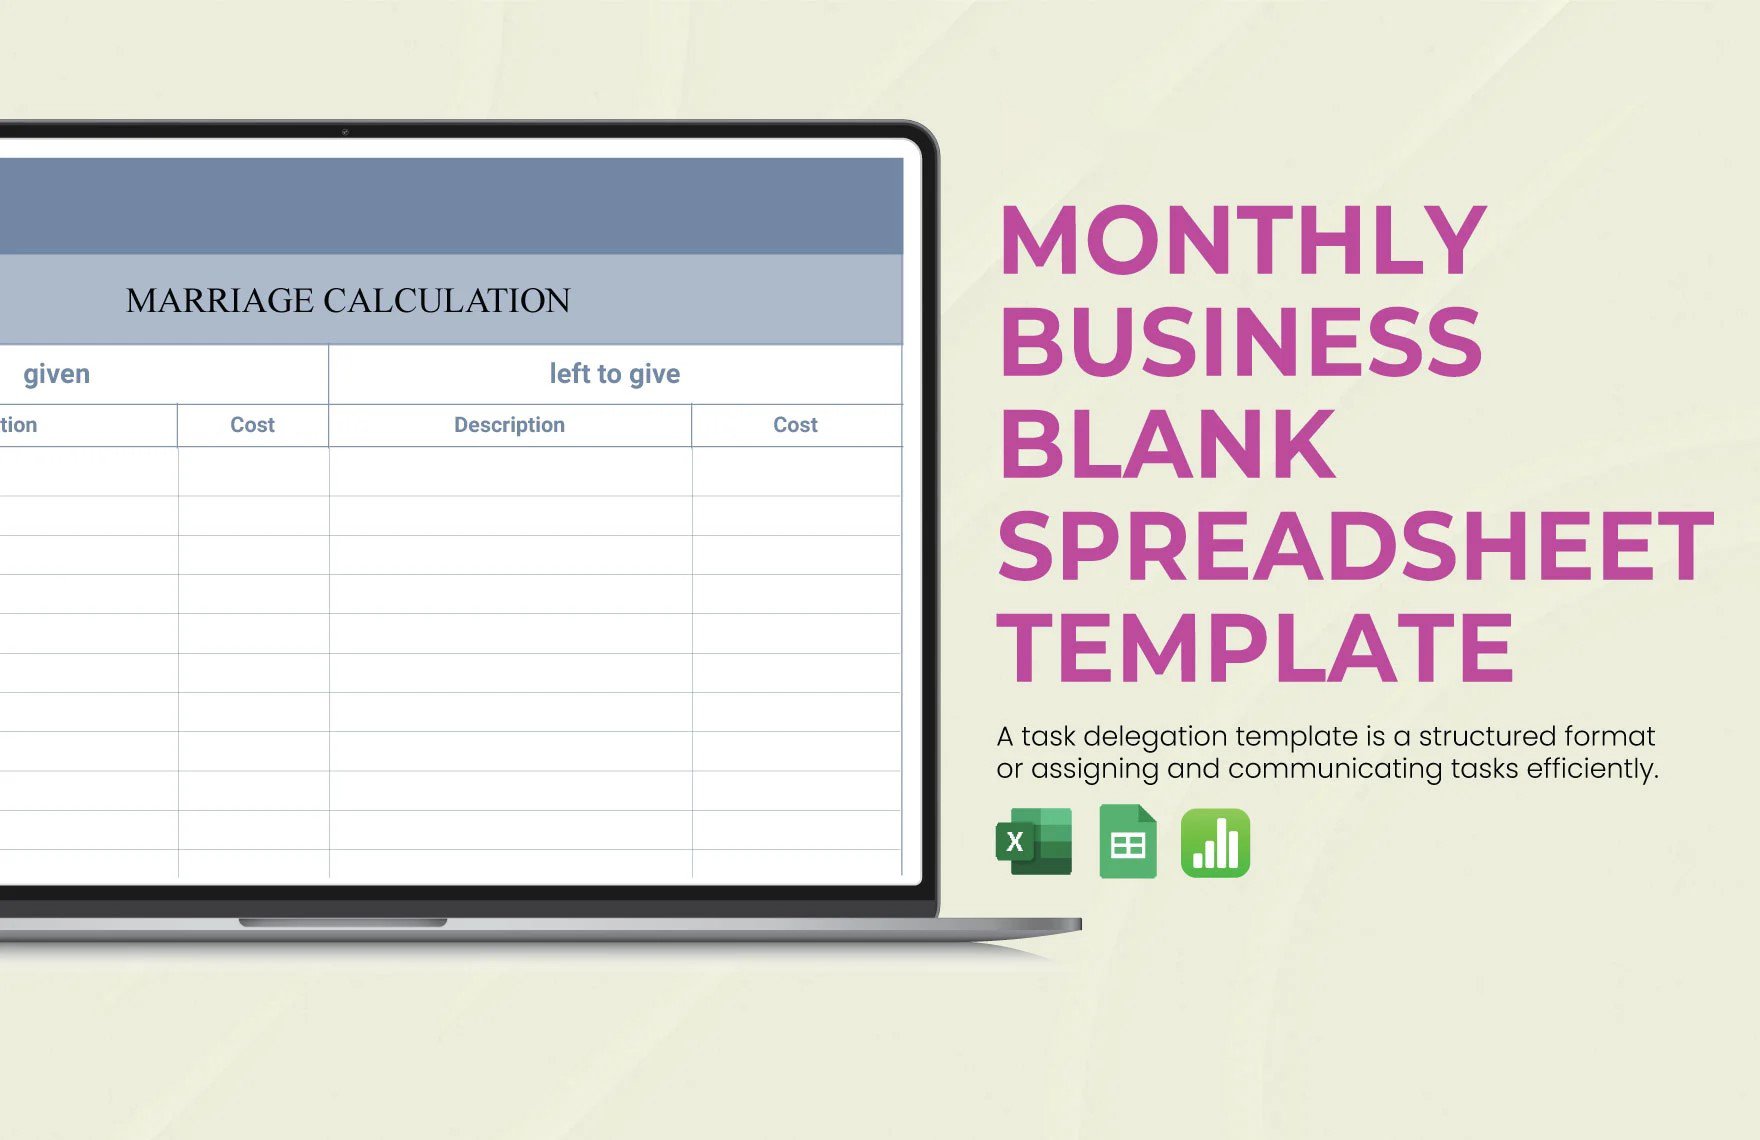 Free Monthly Business Blank Spreadsheet Template in Word, Google Docs, Excel, PDF, Google Sheets, Apple Pages, Apple Numbers